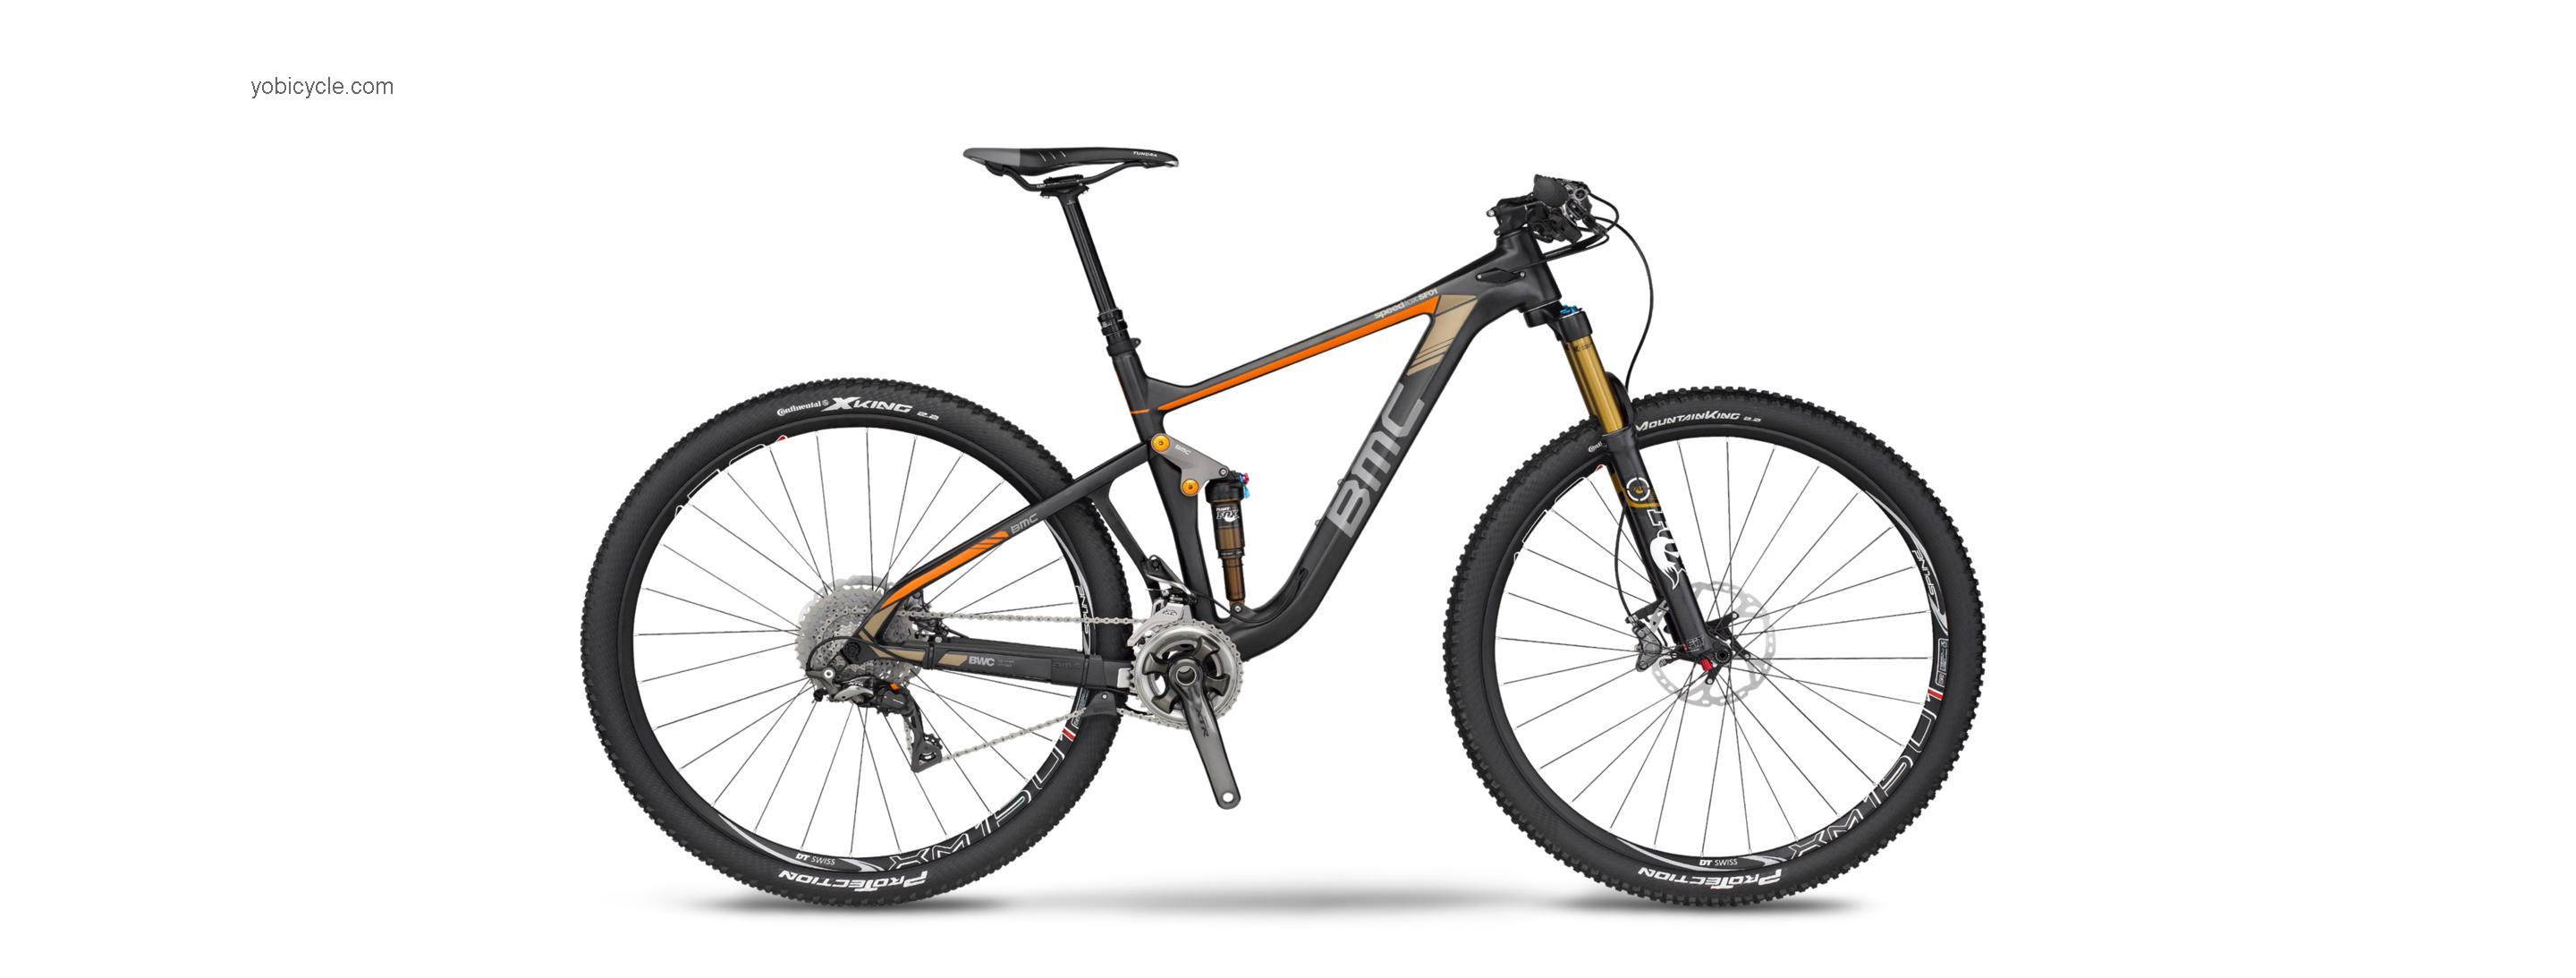 BMC Speedfox SF01 29 XTR competitors and comparison tool online specs and performance